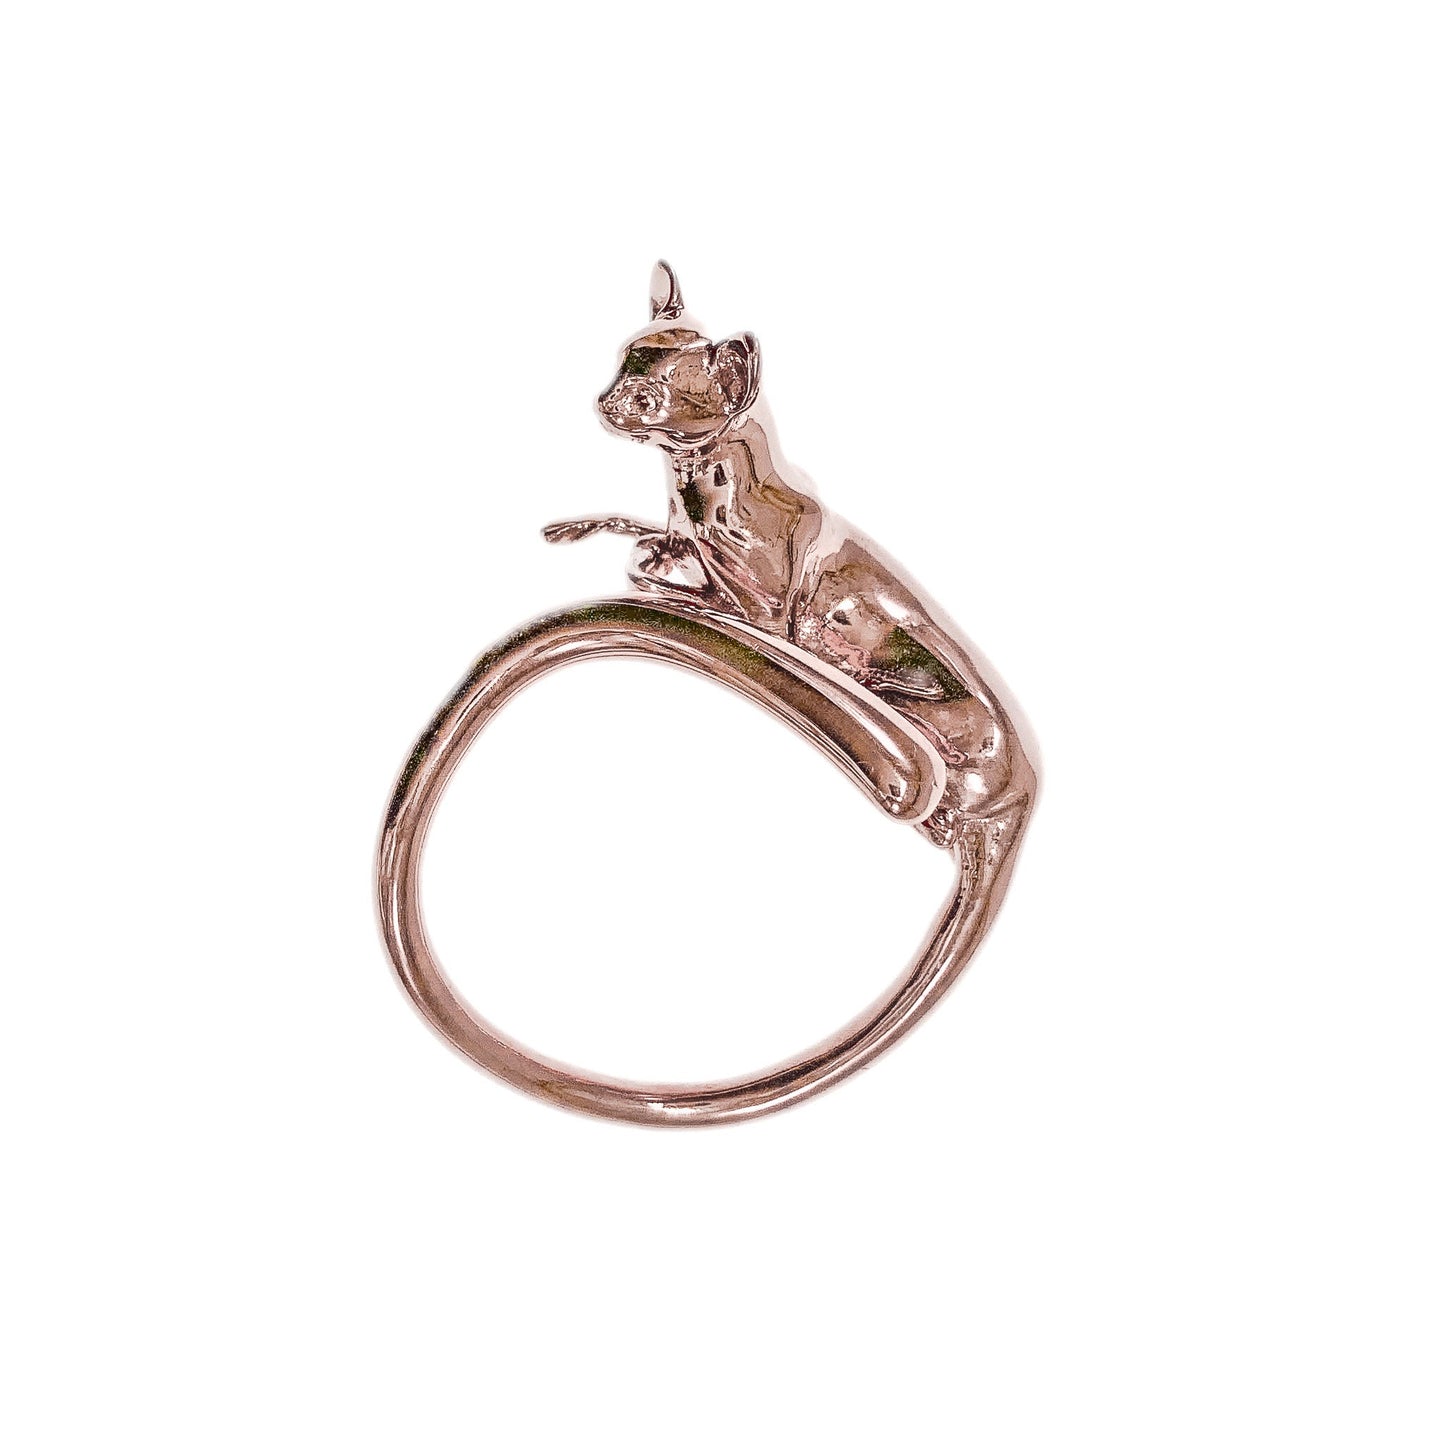 Egyptian Bastet Cat Ring in Solid Gold